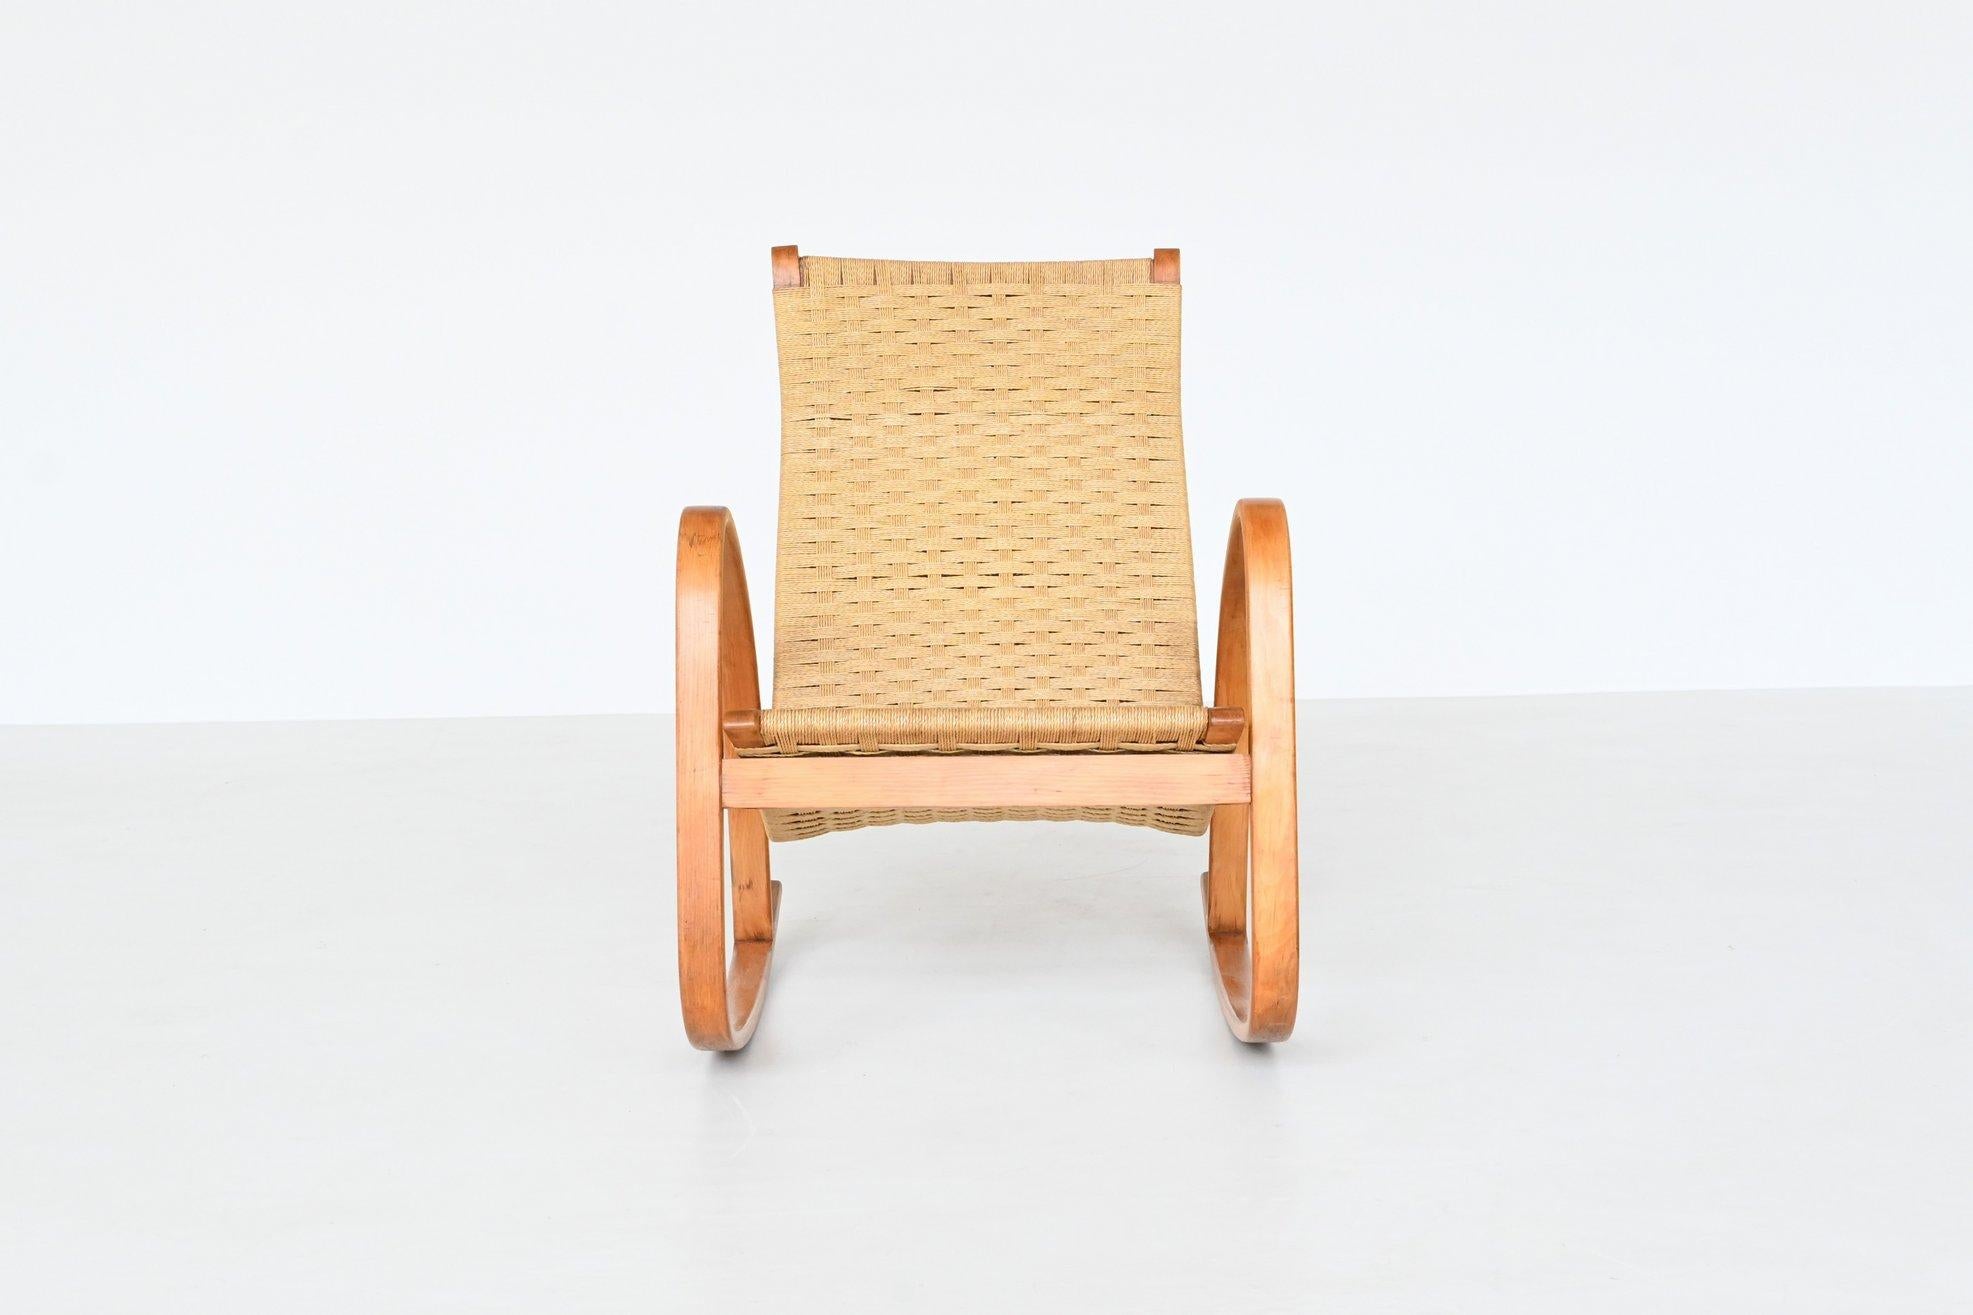 Beautiful shaped Italian rocking chair in the style of Luigi Crassevig or Alvar Aalto, Italy 1960. This very nice sculptural rocking chair has a birch bentwood frame which support a woven paper cord upholstery. The choice of materials, solid wood